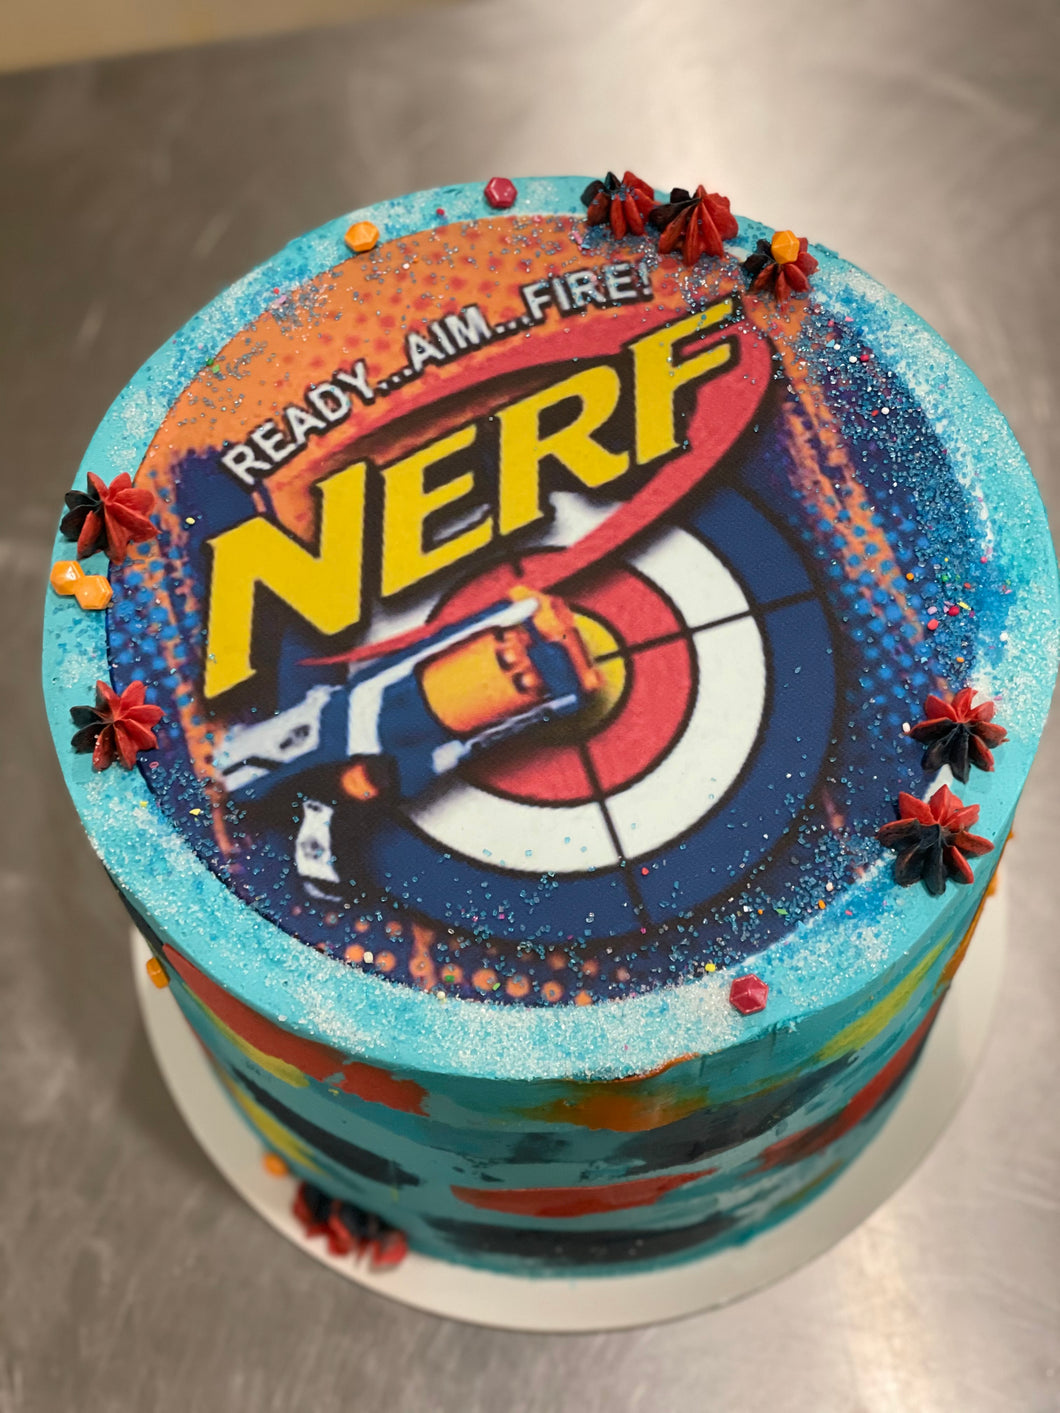 Nerf Gun Printed Image Cake - Size Options Available